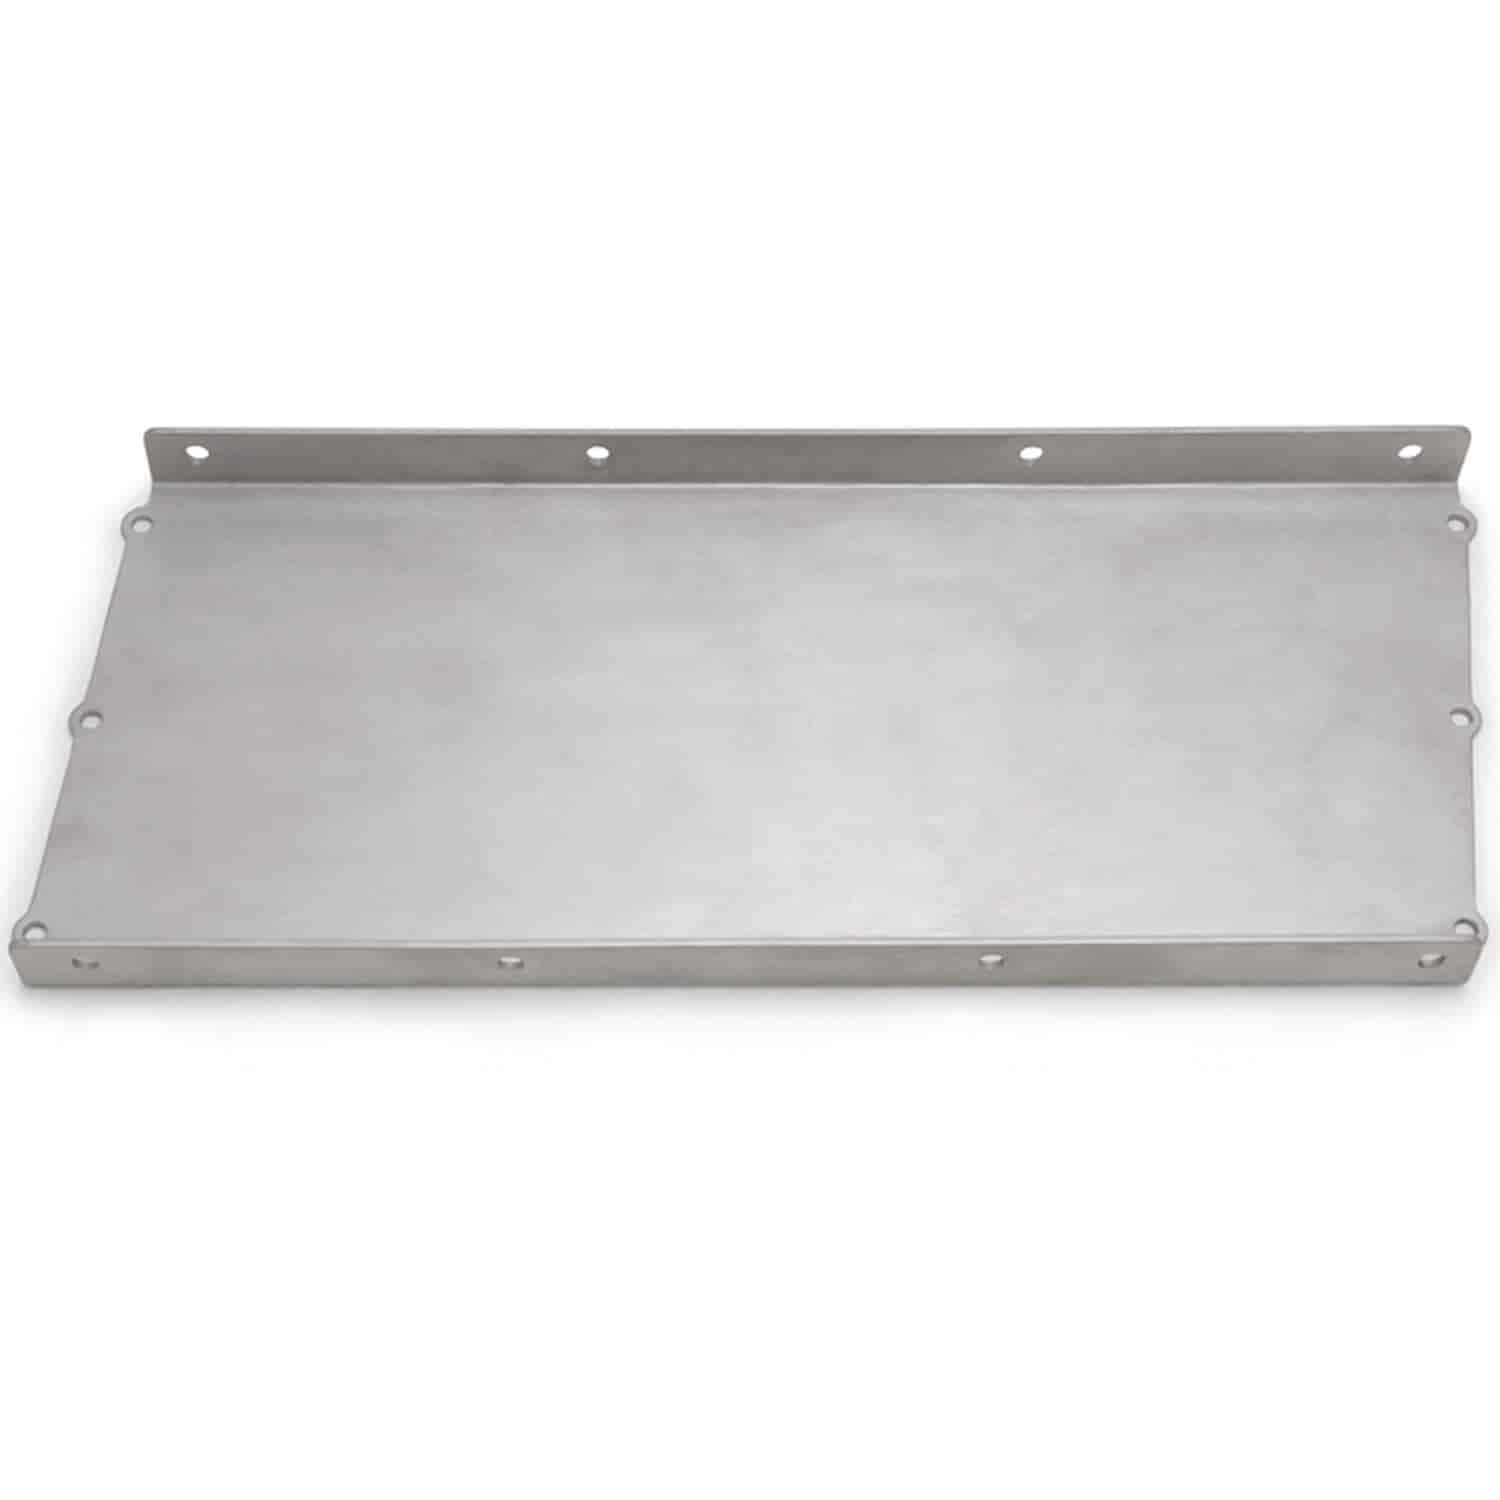 Victor Valley Cover Plate Kit for "RB" Big Block Chrysler